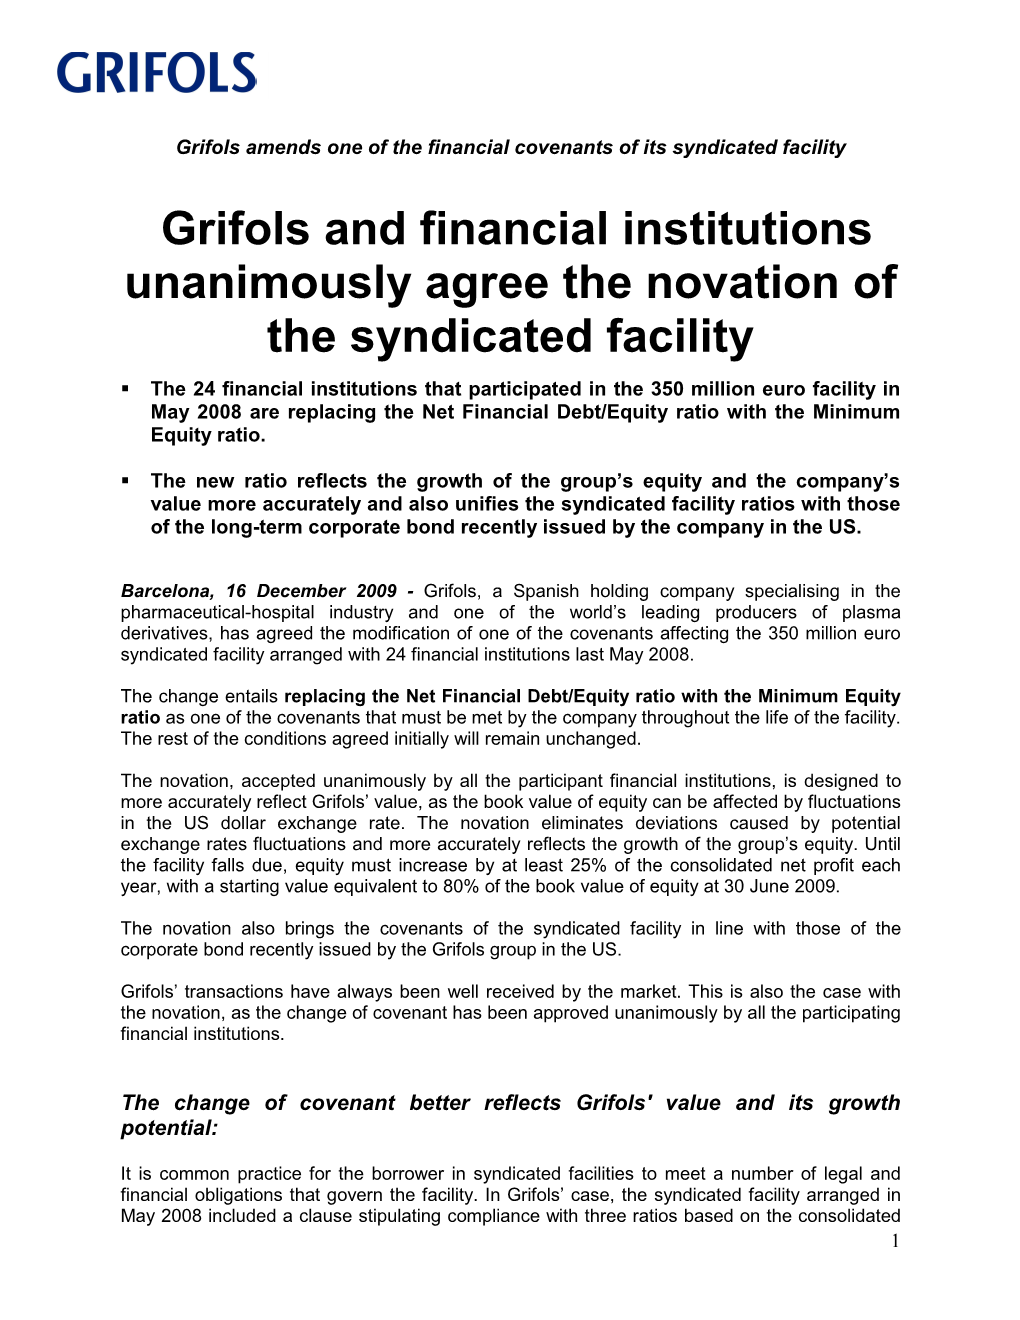 December 16, 2009 Grifols and Financial Institutions Unanimously